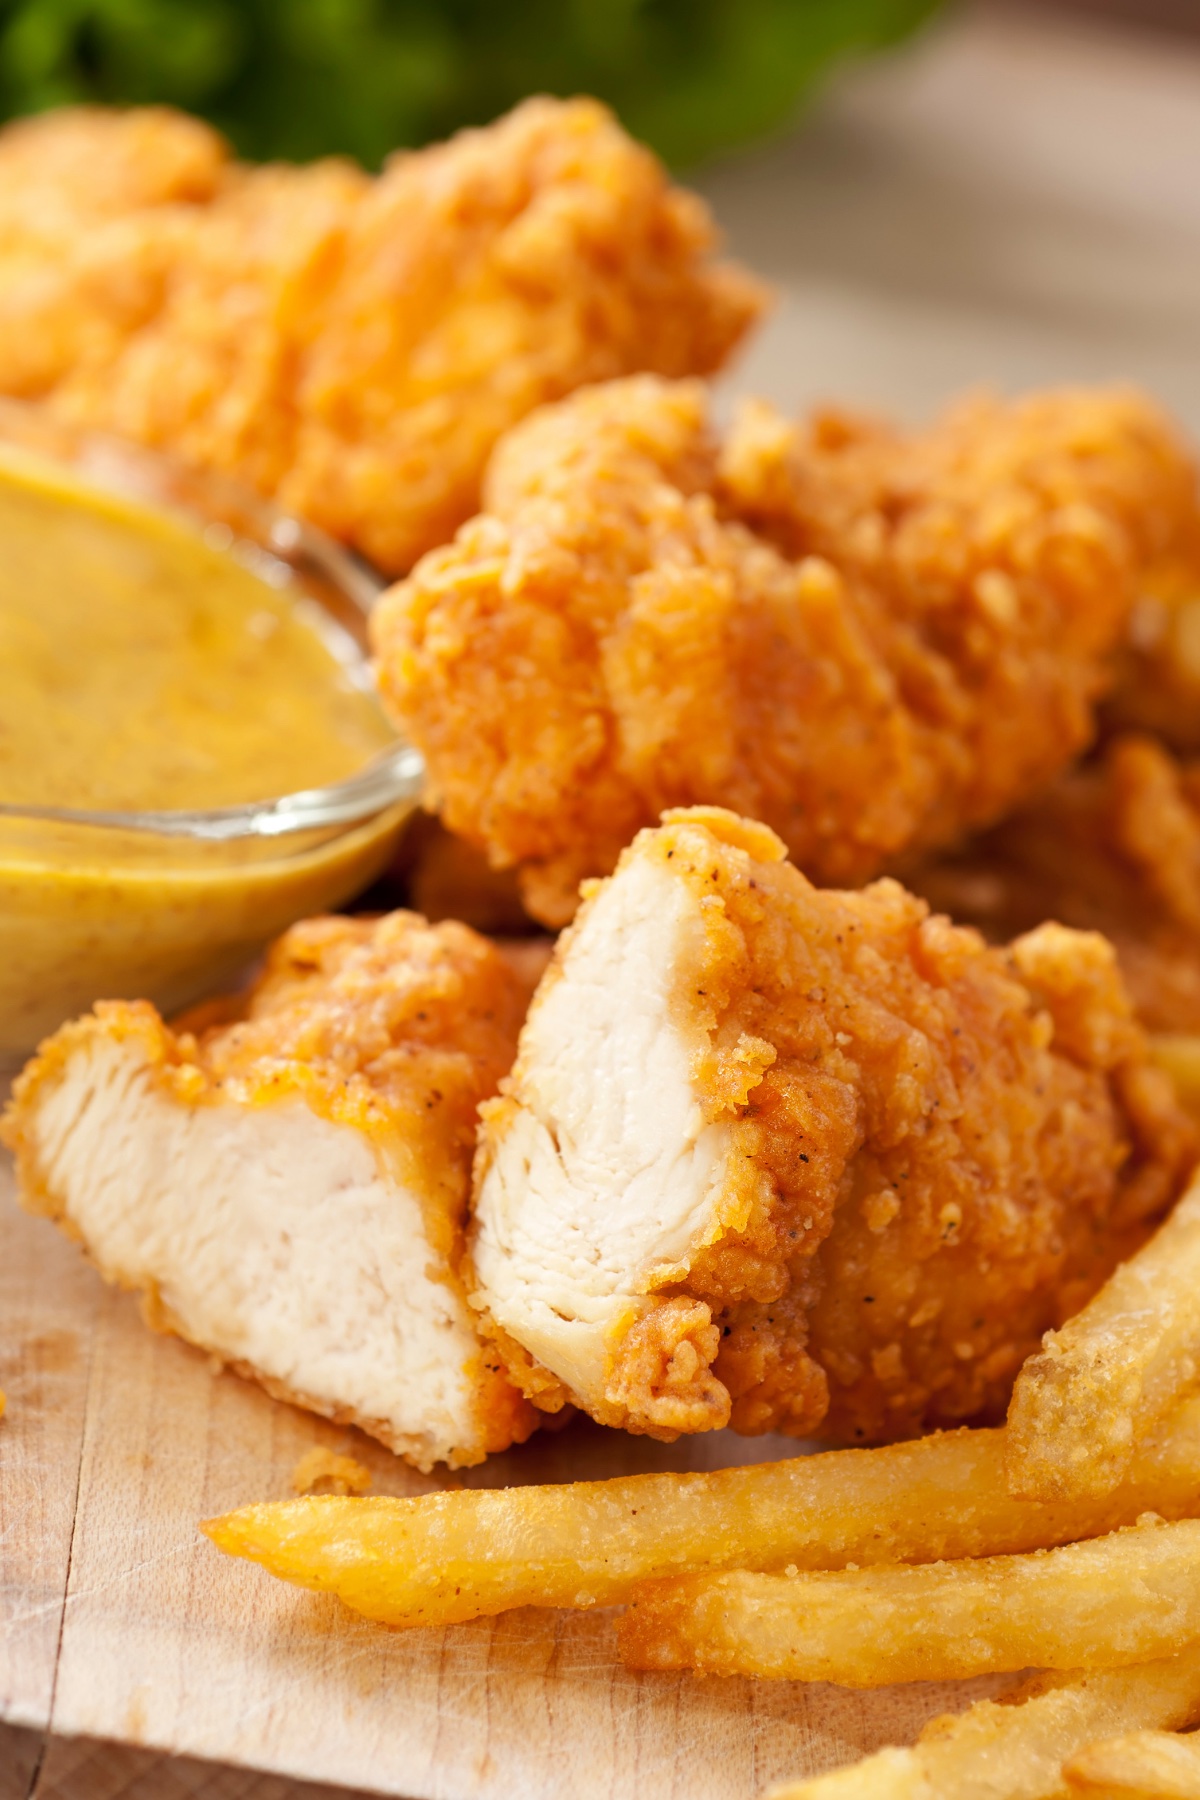 made with juicy chicken breast and served with the famous Cane’s sauce. Those who are in the know will tell you that these chicken fingers are better than anything found at competitors like KFC and Chik-Fil-A. They’re THAT good!